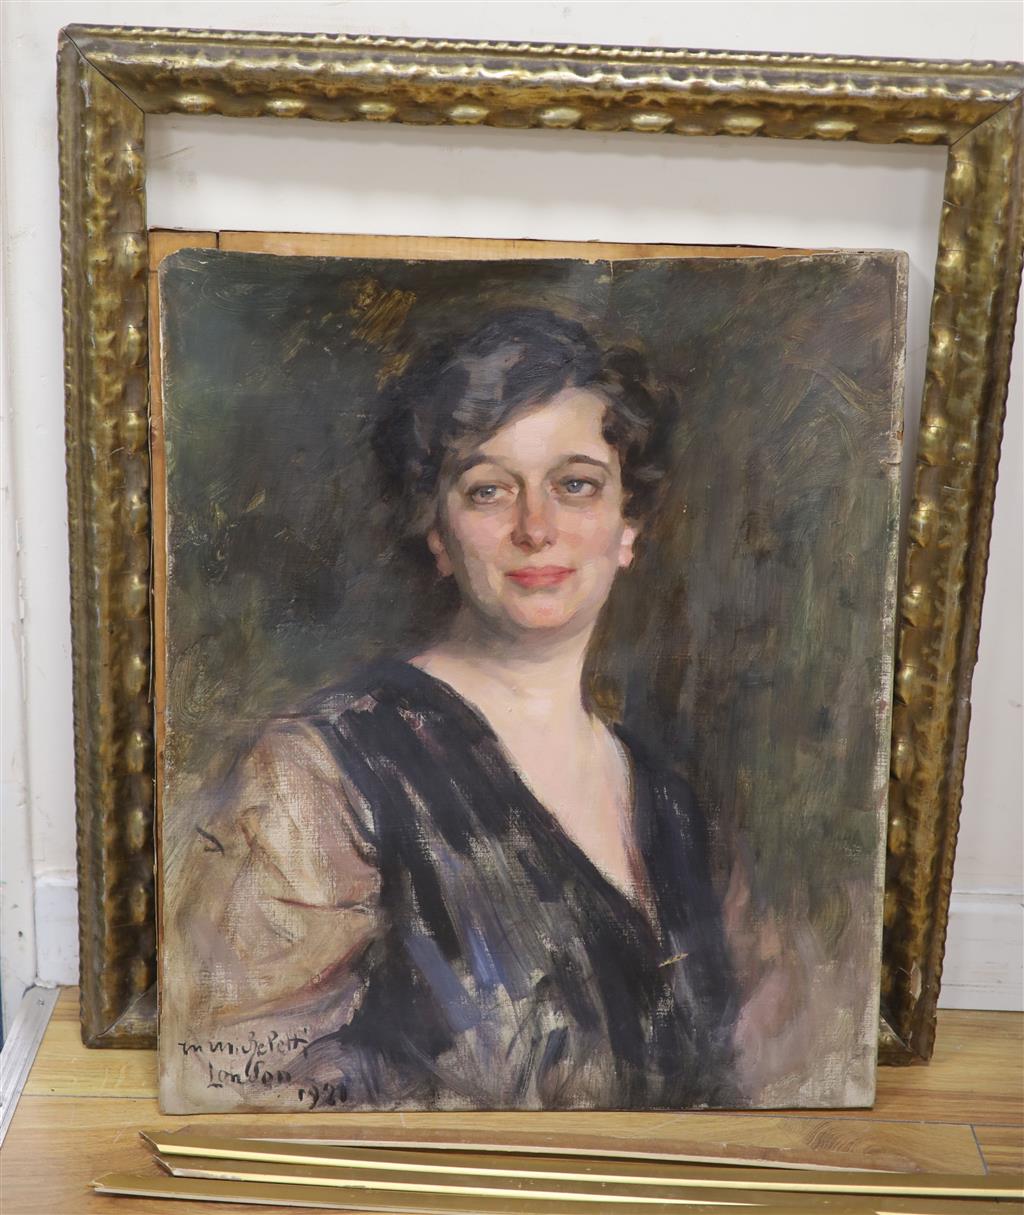 Mario Micheletti, (Italian, 1892-1975), oil on canvas, Portrait sketch of a lady, signed and dated London 1921, 61 x 51cm, Christies s